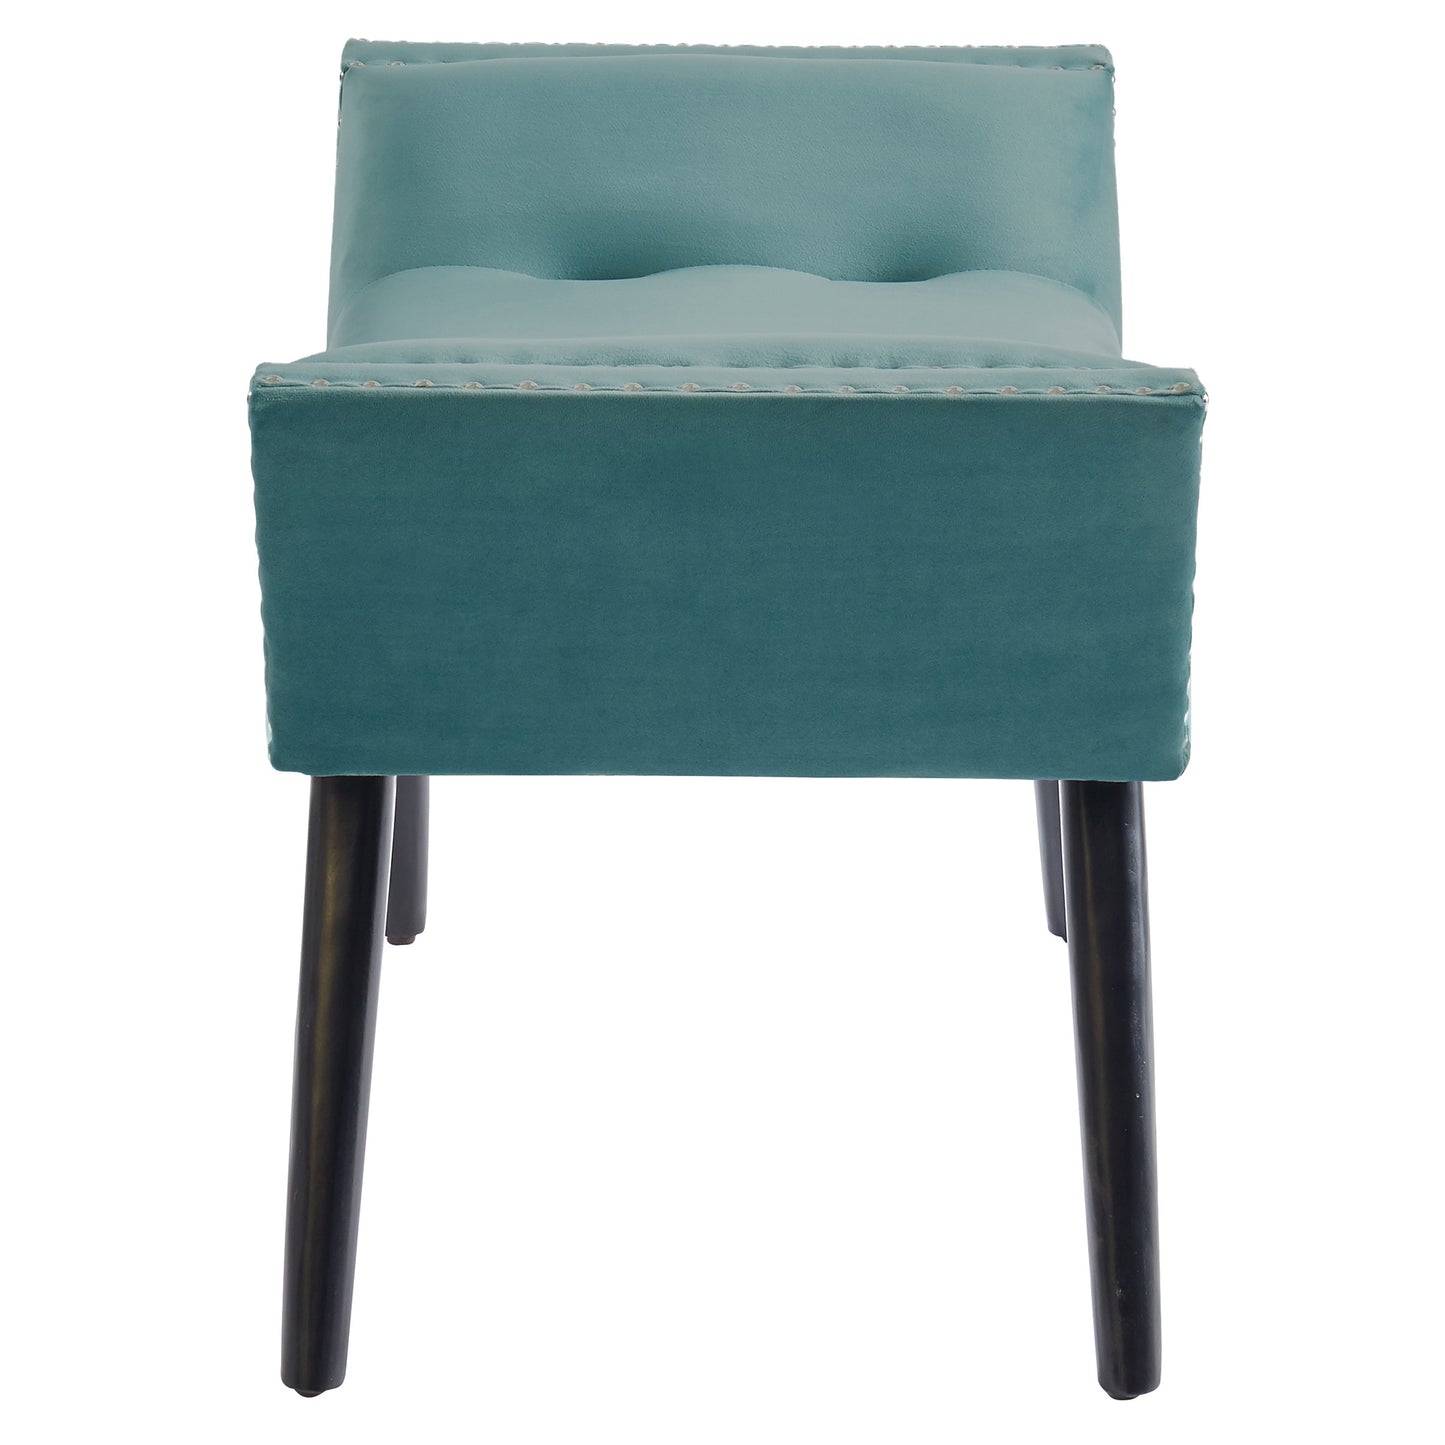 Lana Bench in Teal - Dreamart Gallery